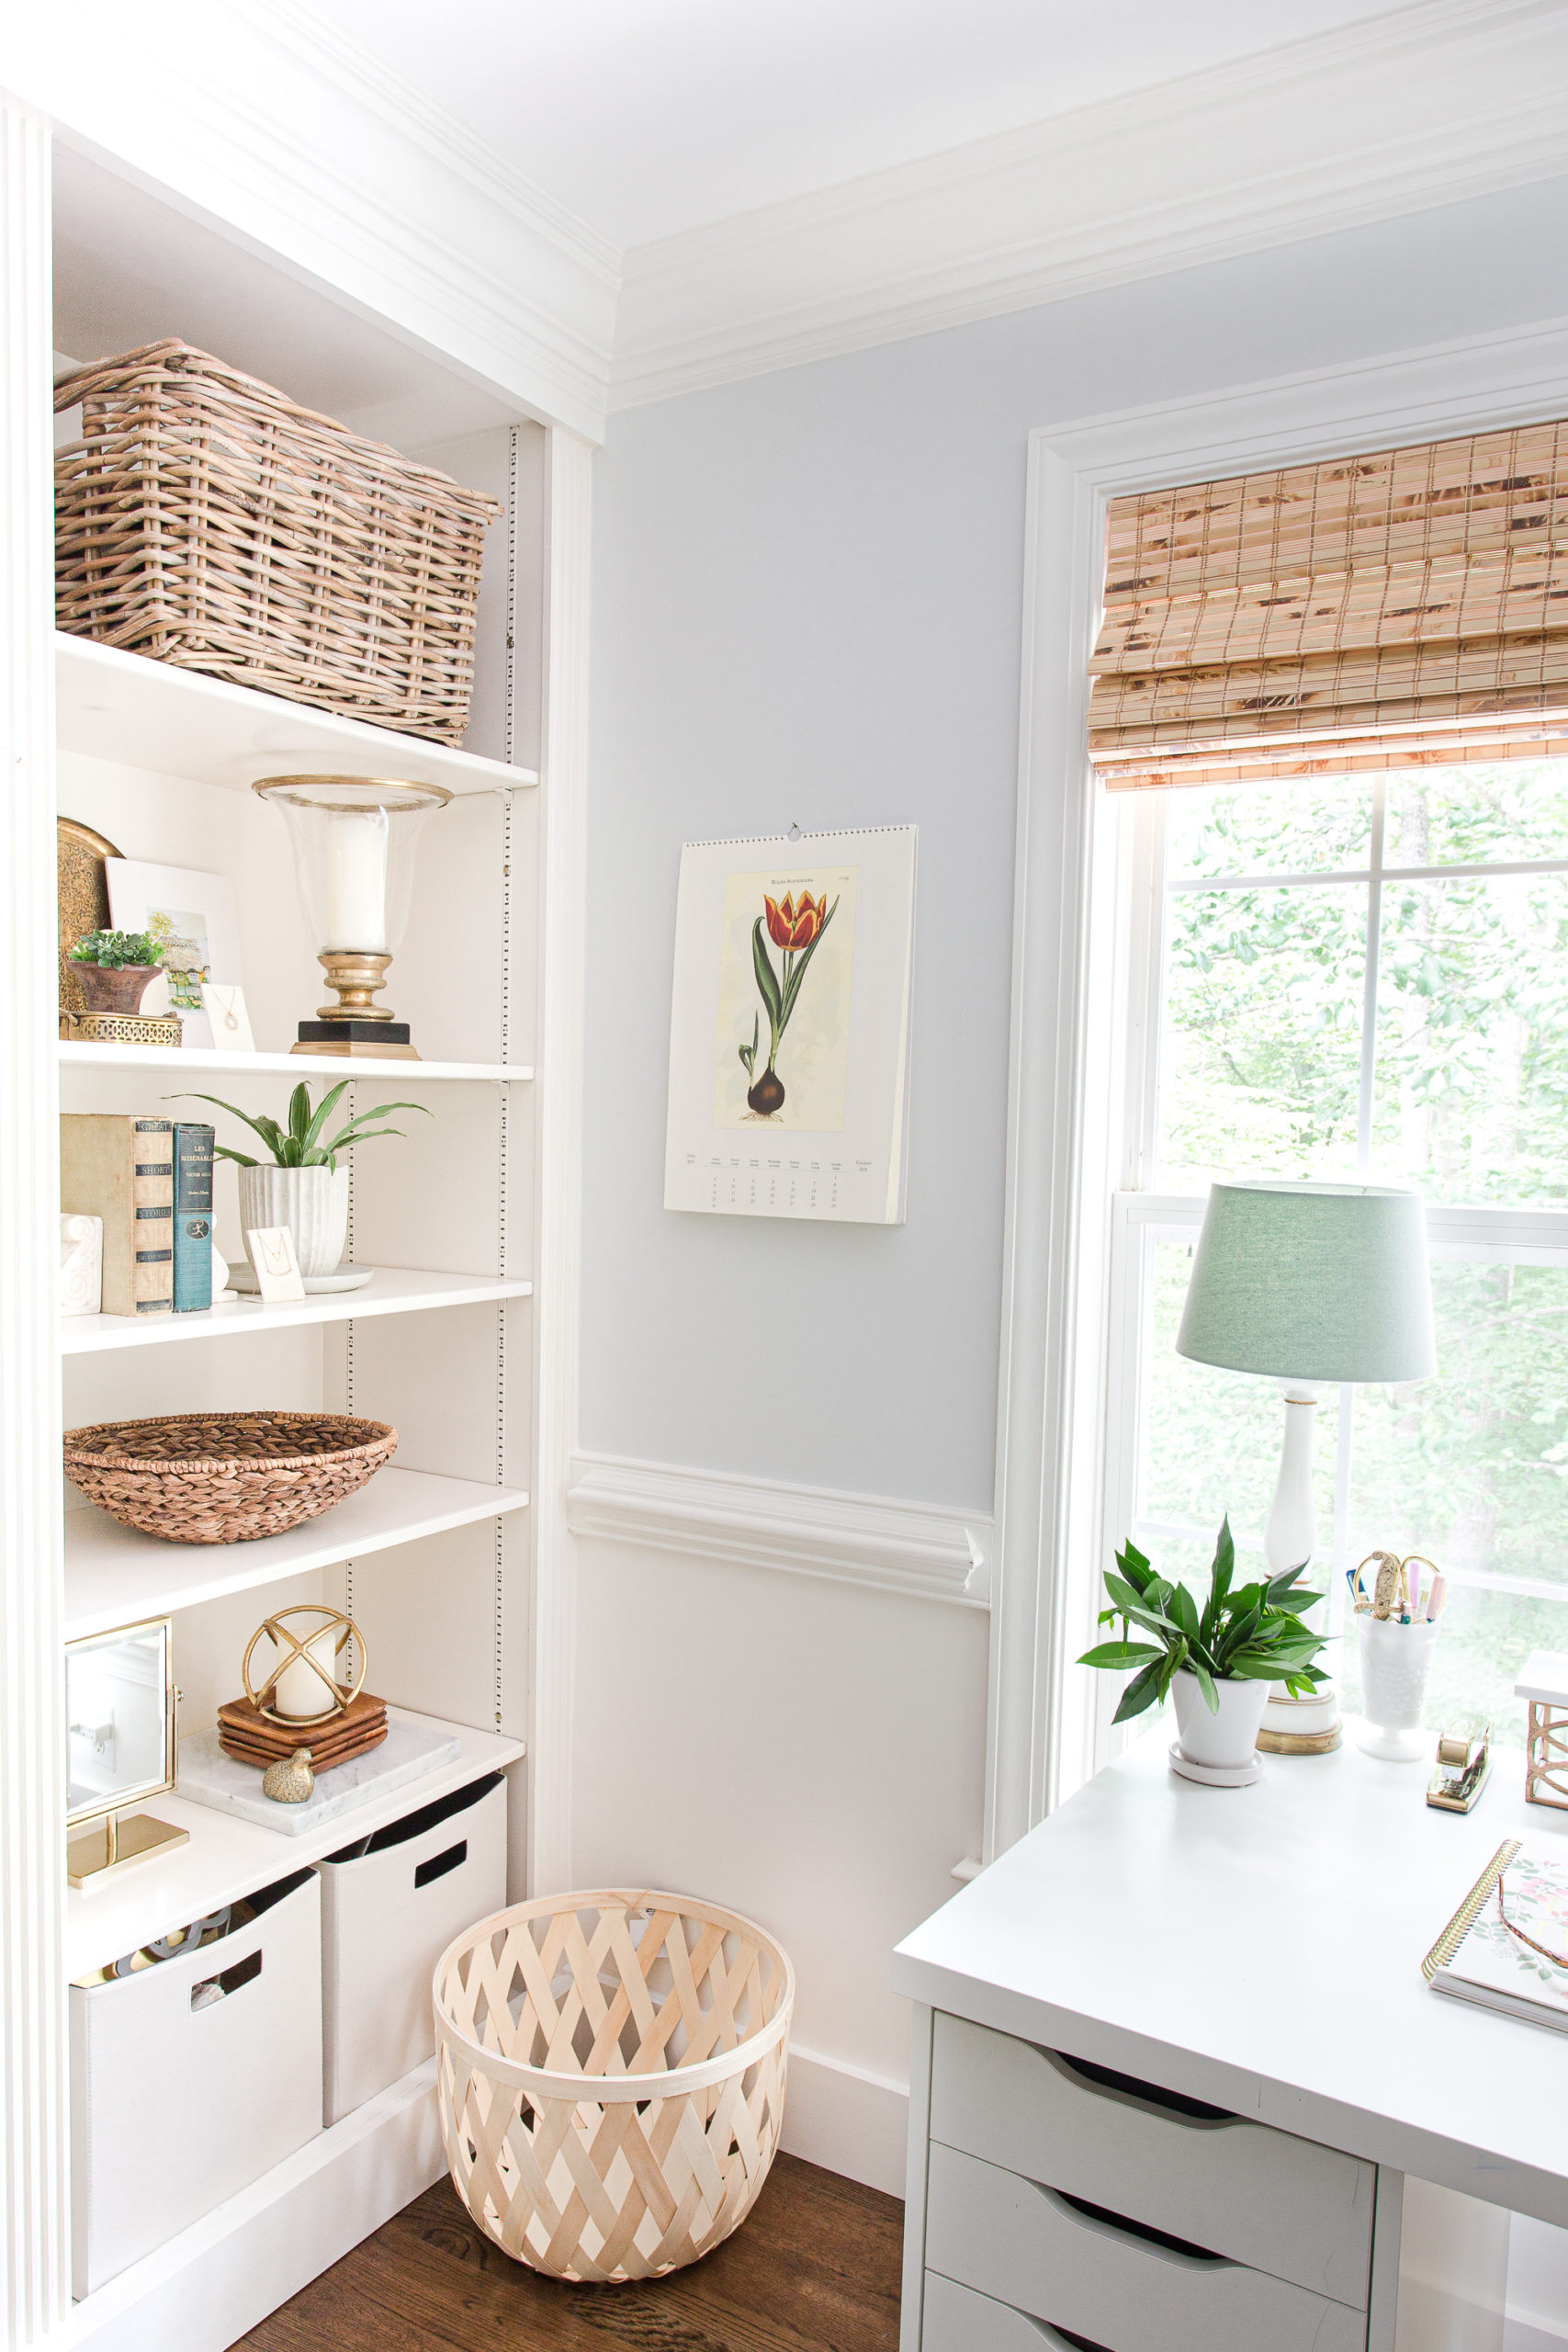 Bookcase in home office next to a desk overlooking a window with baskets on top shelf, lamp and green plant on desk